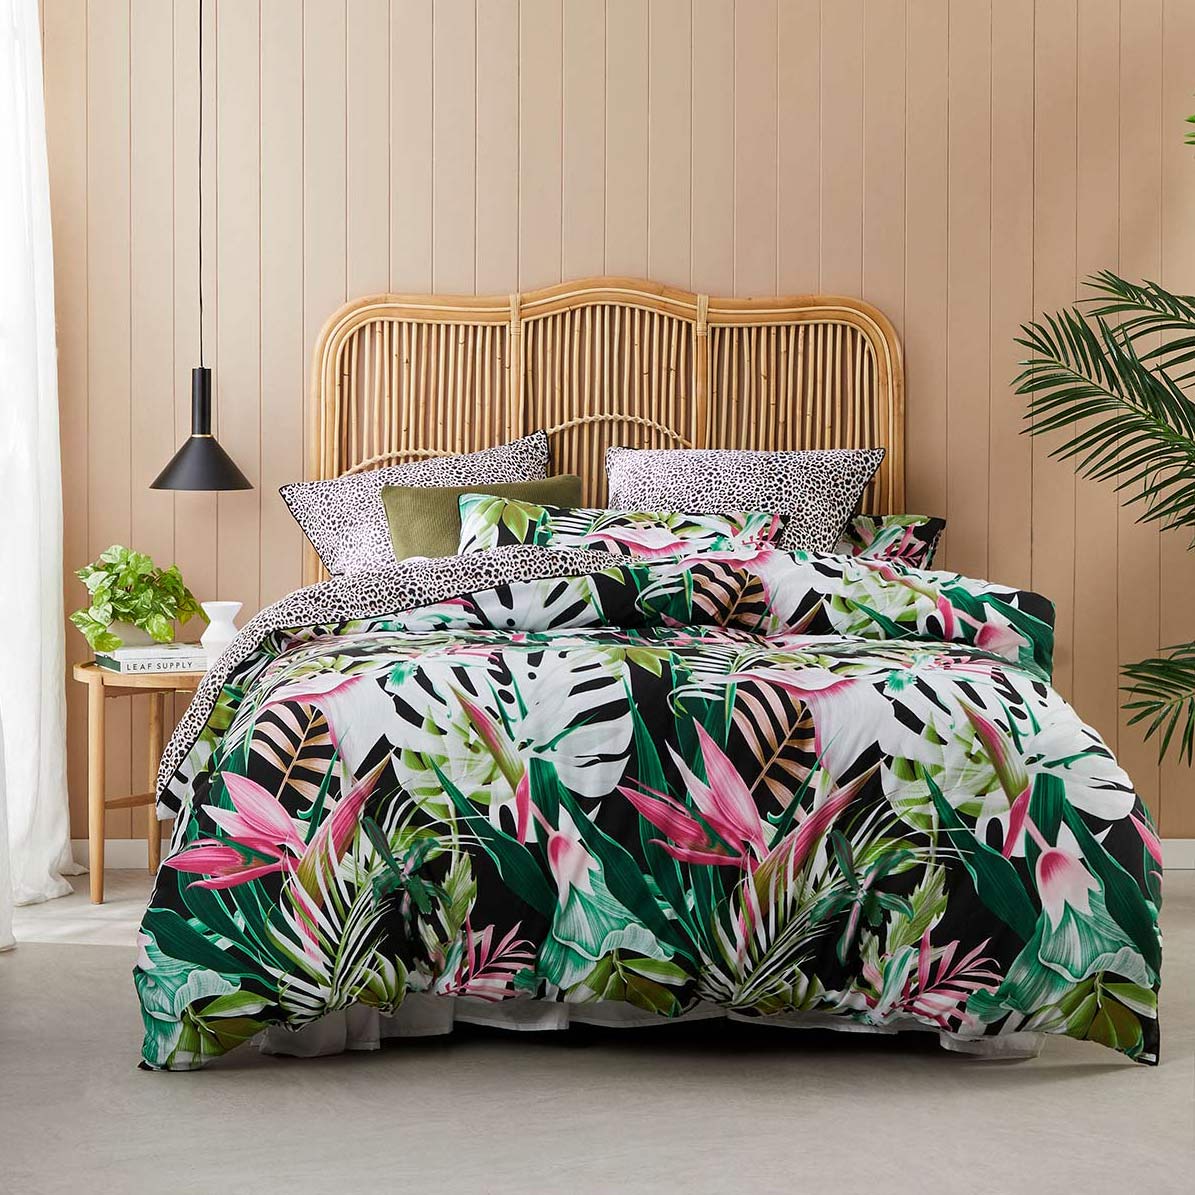 Akena Forest Quilt Cover Set by Logan & Mason